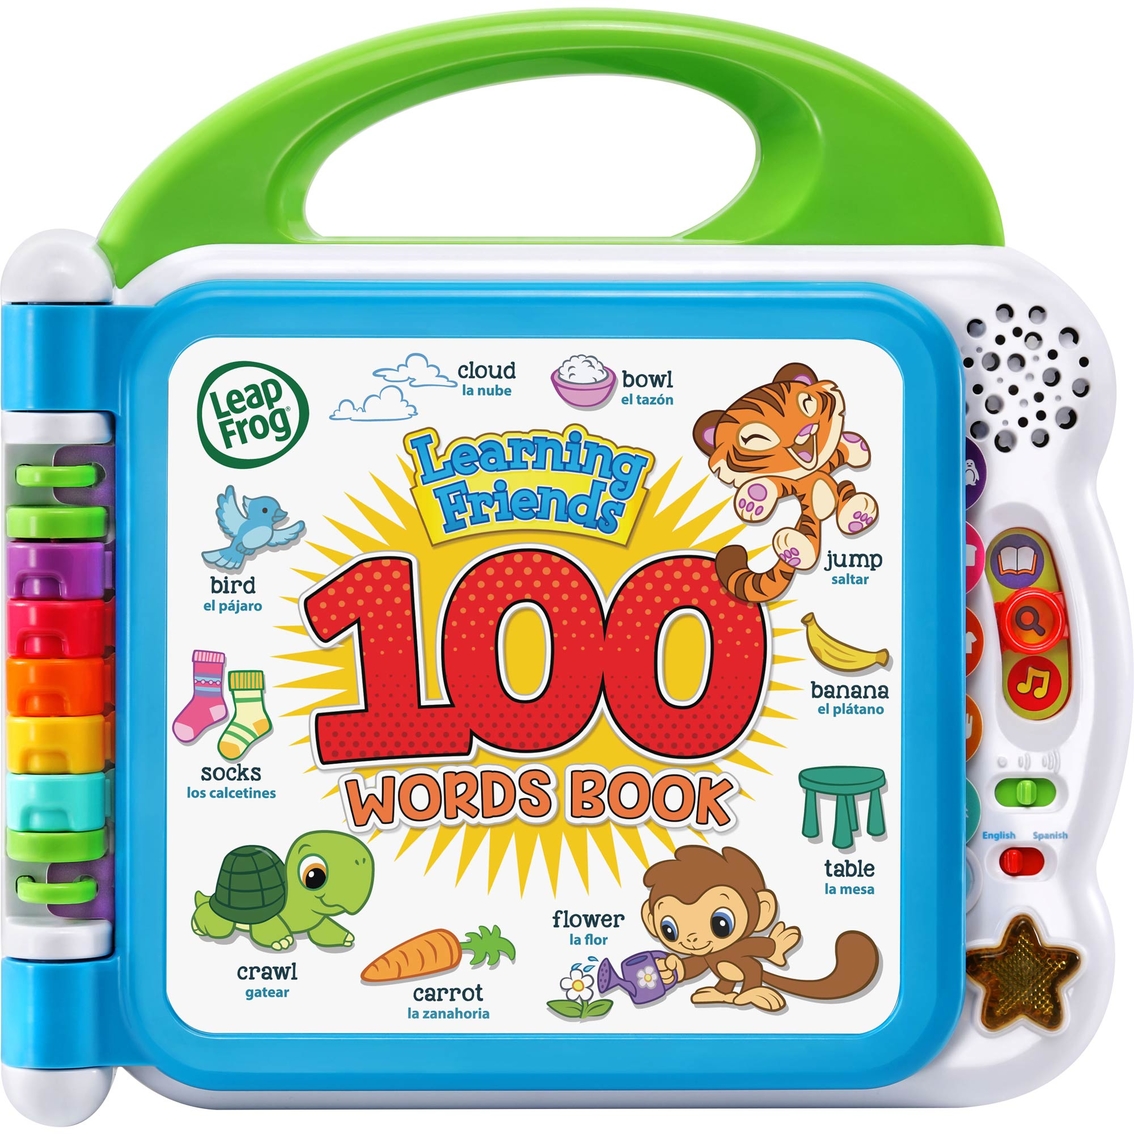 LeapFrog Learning Friends 100 Words Book - Image 2 of 3